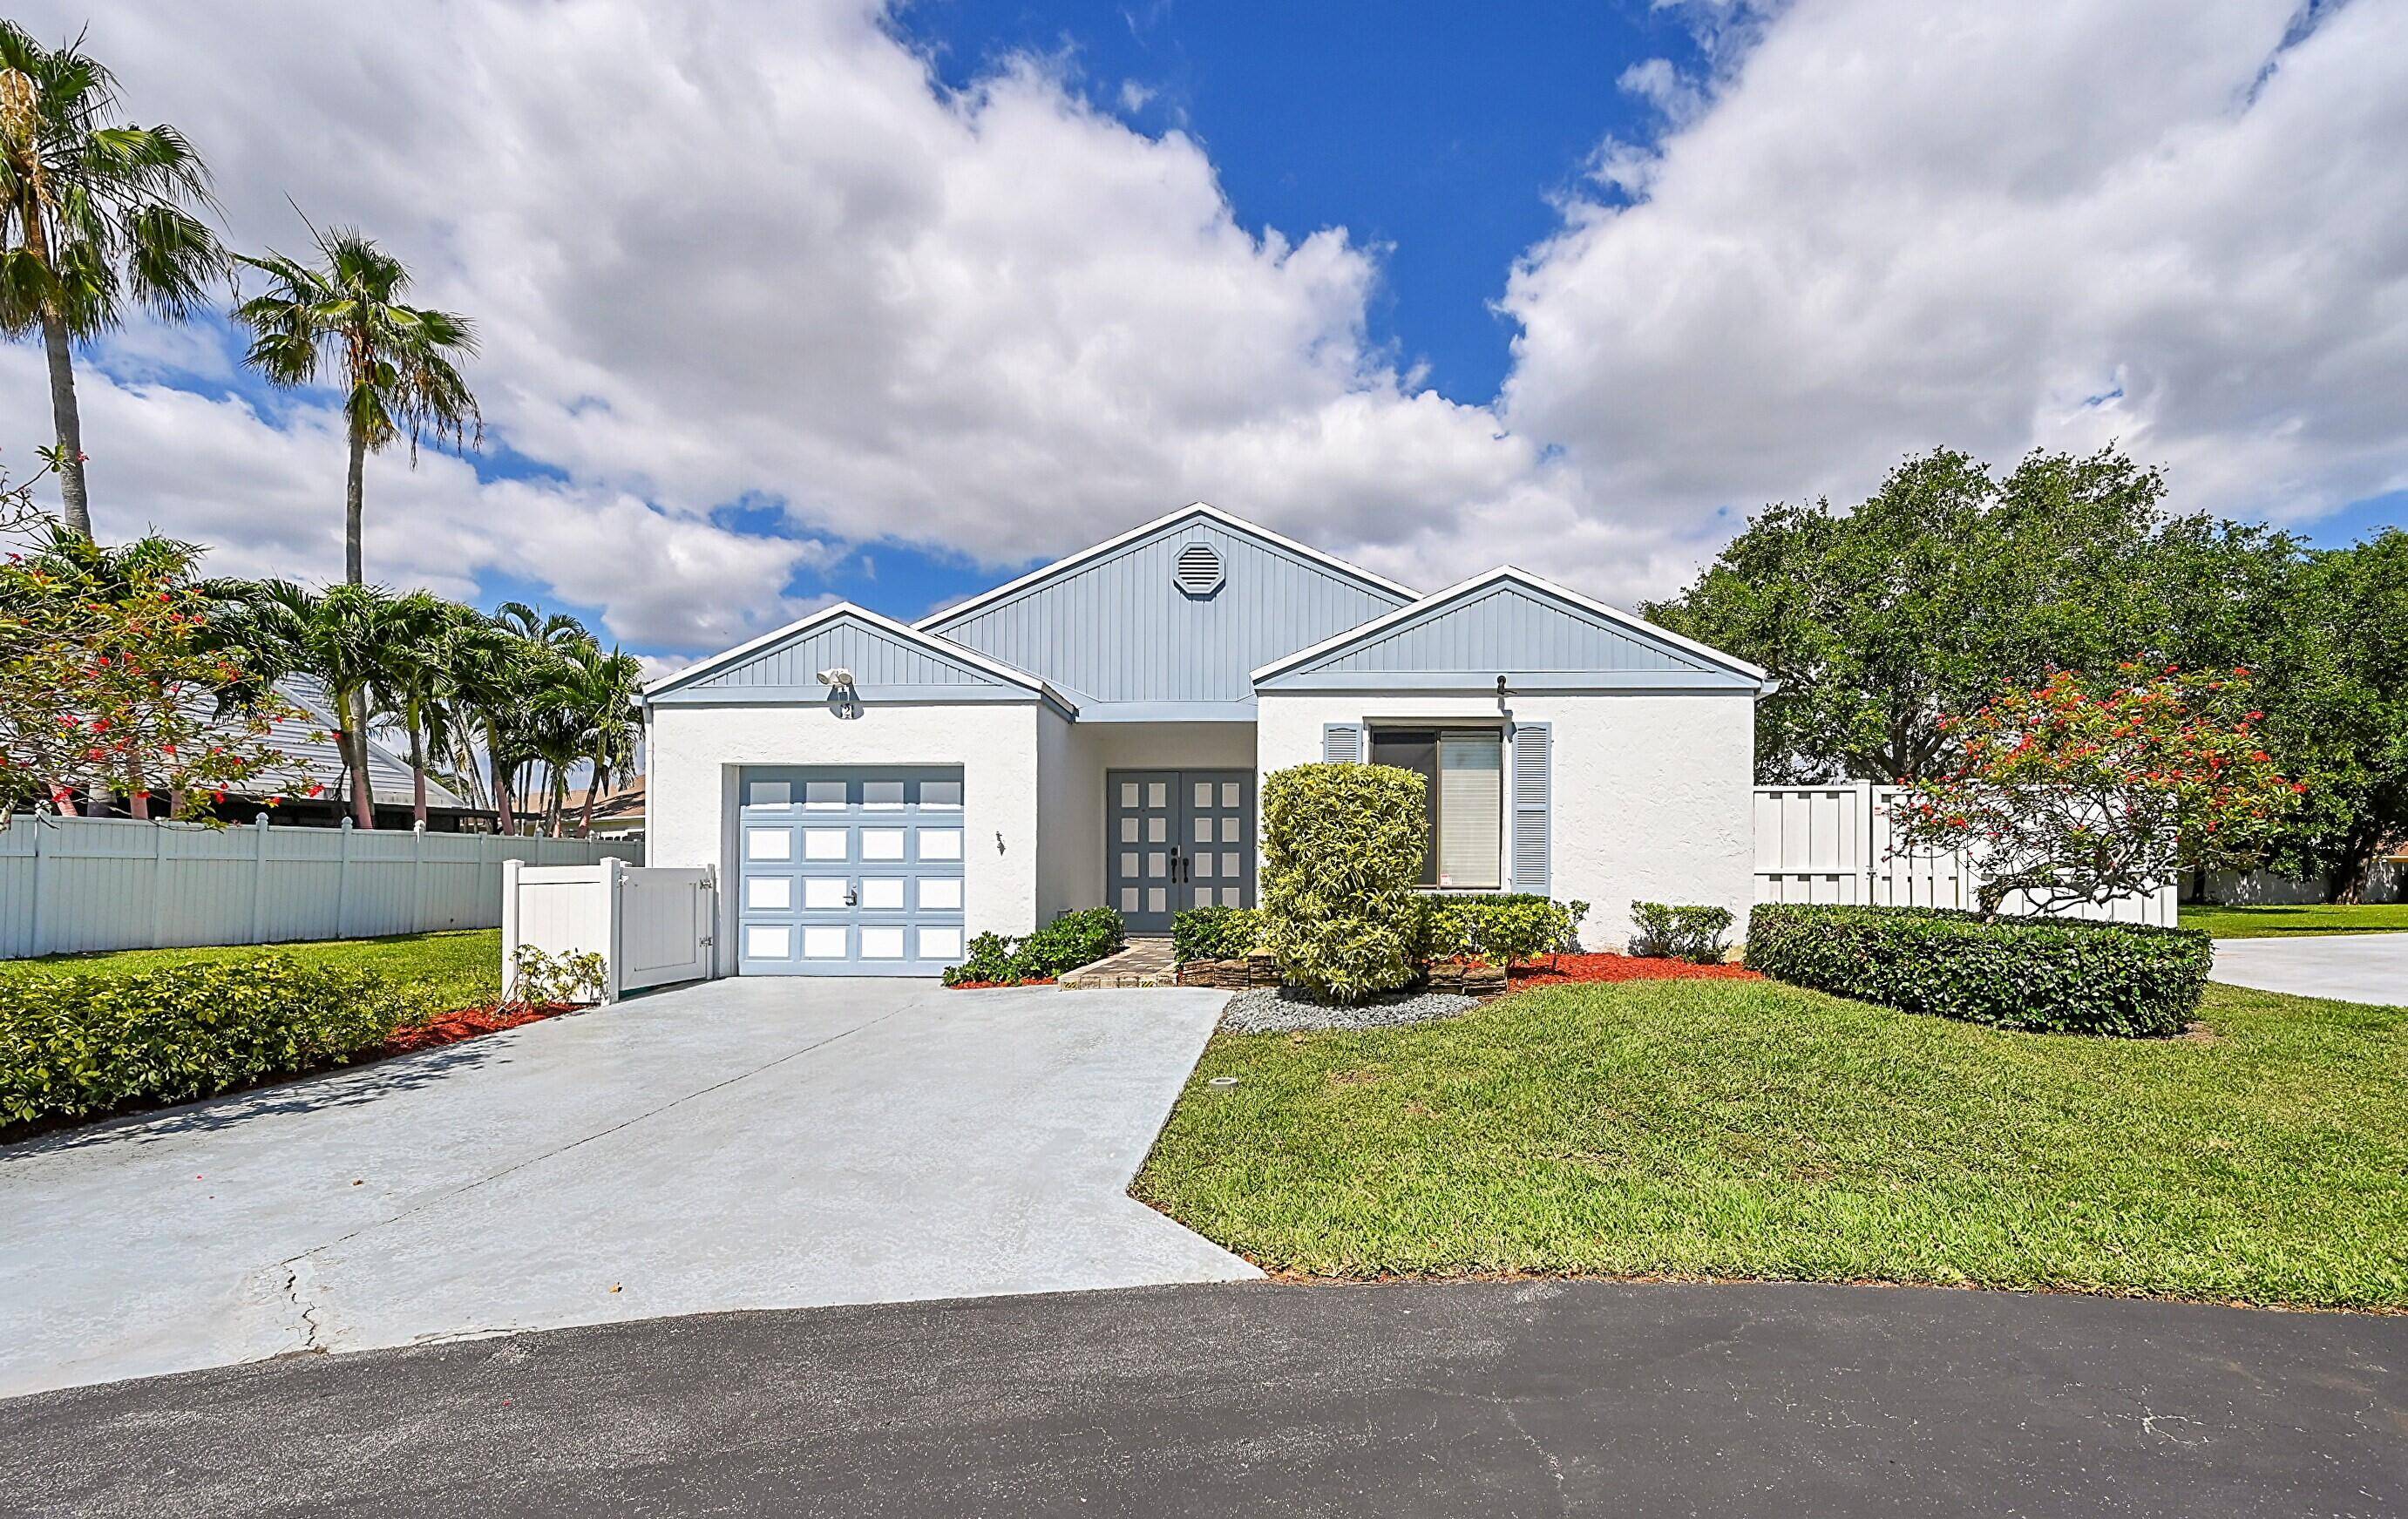 This beautiful 3 bedroom, 2 bath single family home is nestled upon a large grassy corner of a quiet Cul de Sac in the ever popular Boynton Lakes community.